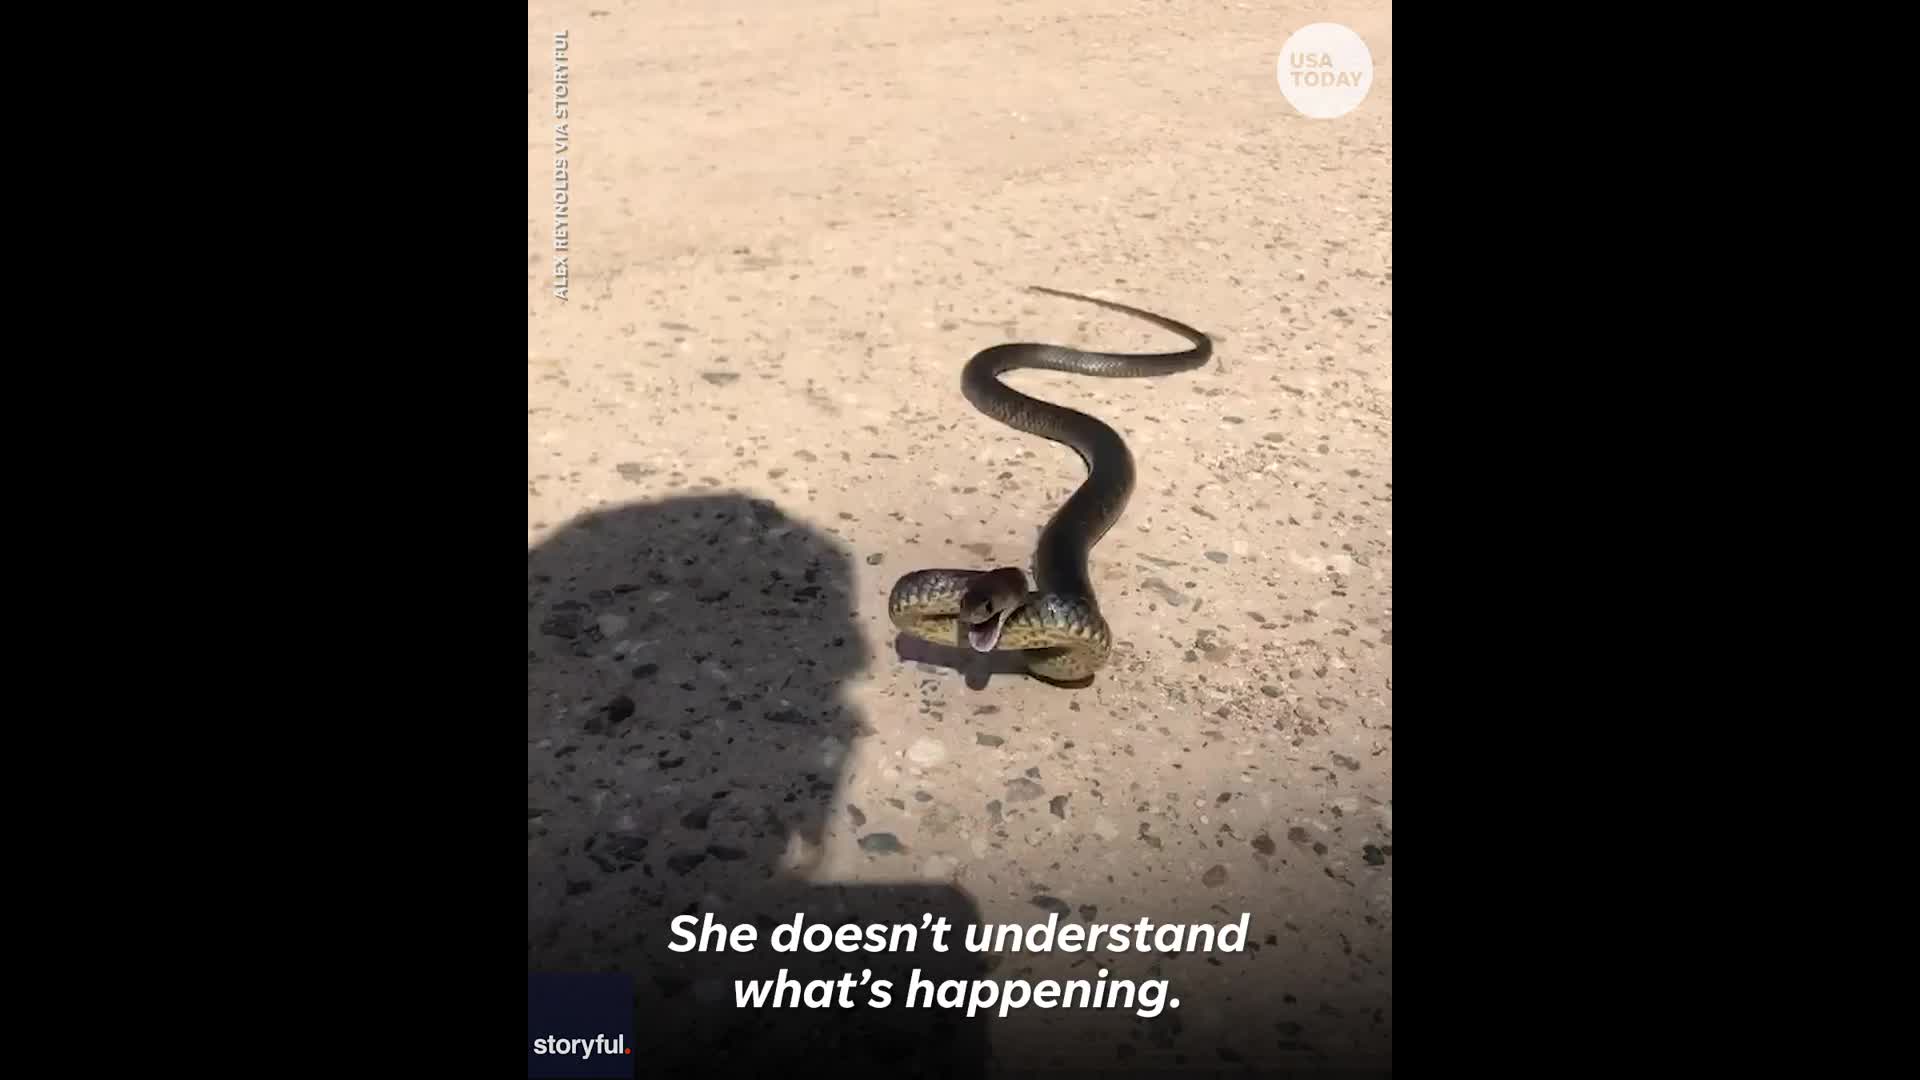 A poisonous snake – with no known toxin – bites San Diego Zoo employee